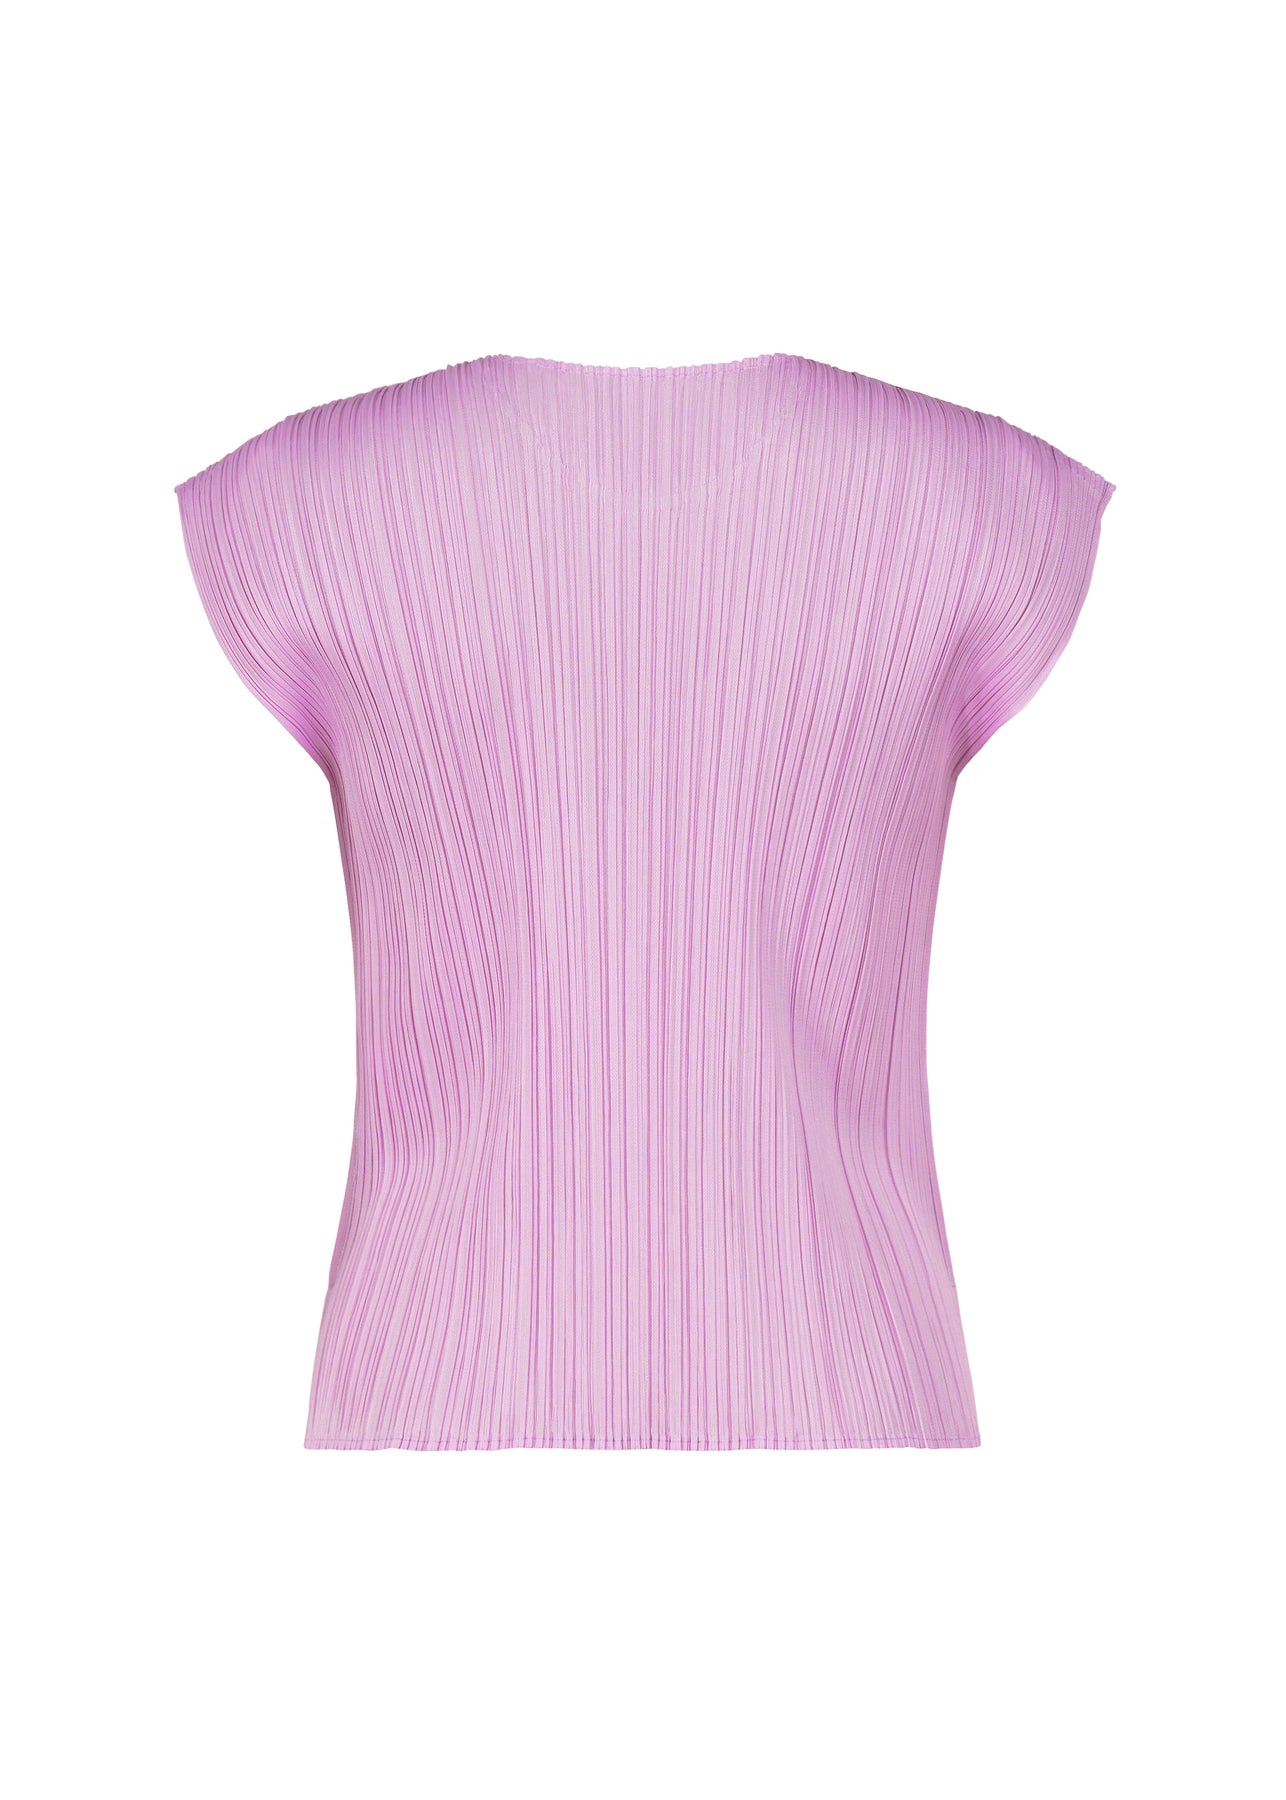 MONTHLY COLORS : JUNE TOP | The official ISSEY MIYAKE ONLINE STORE